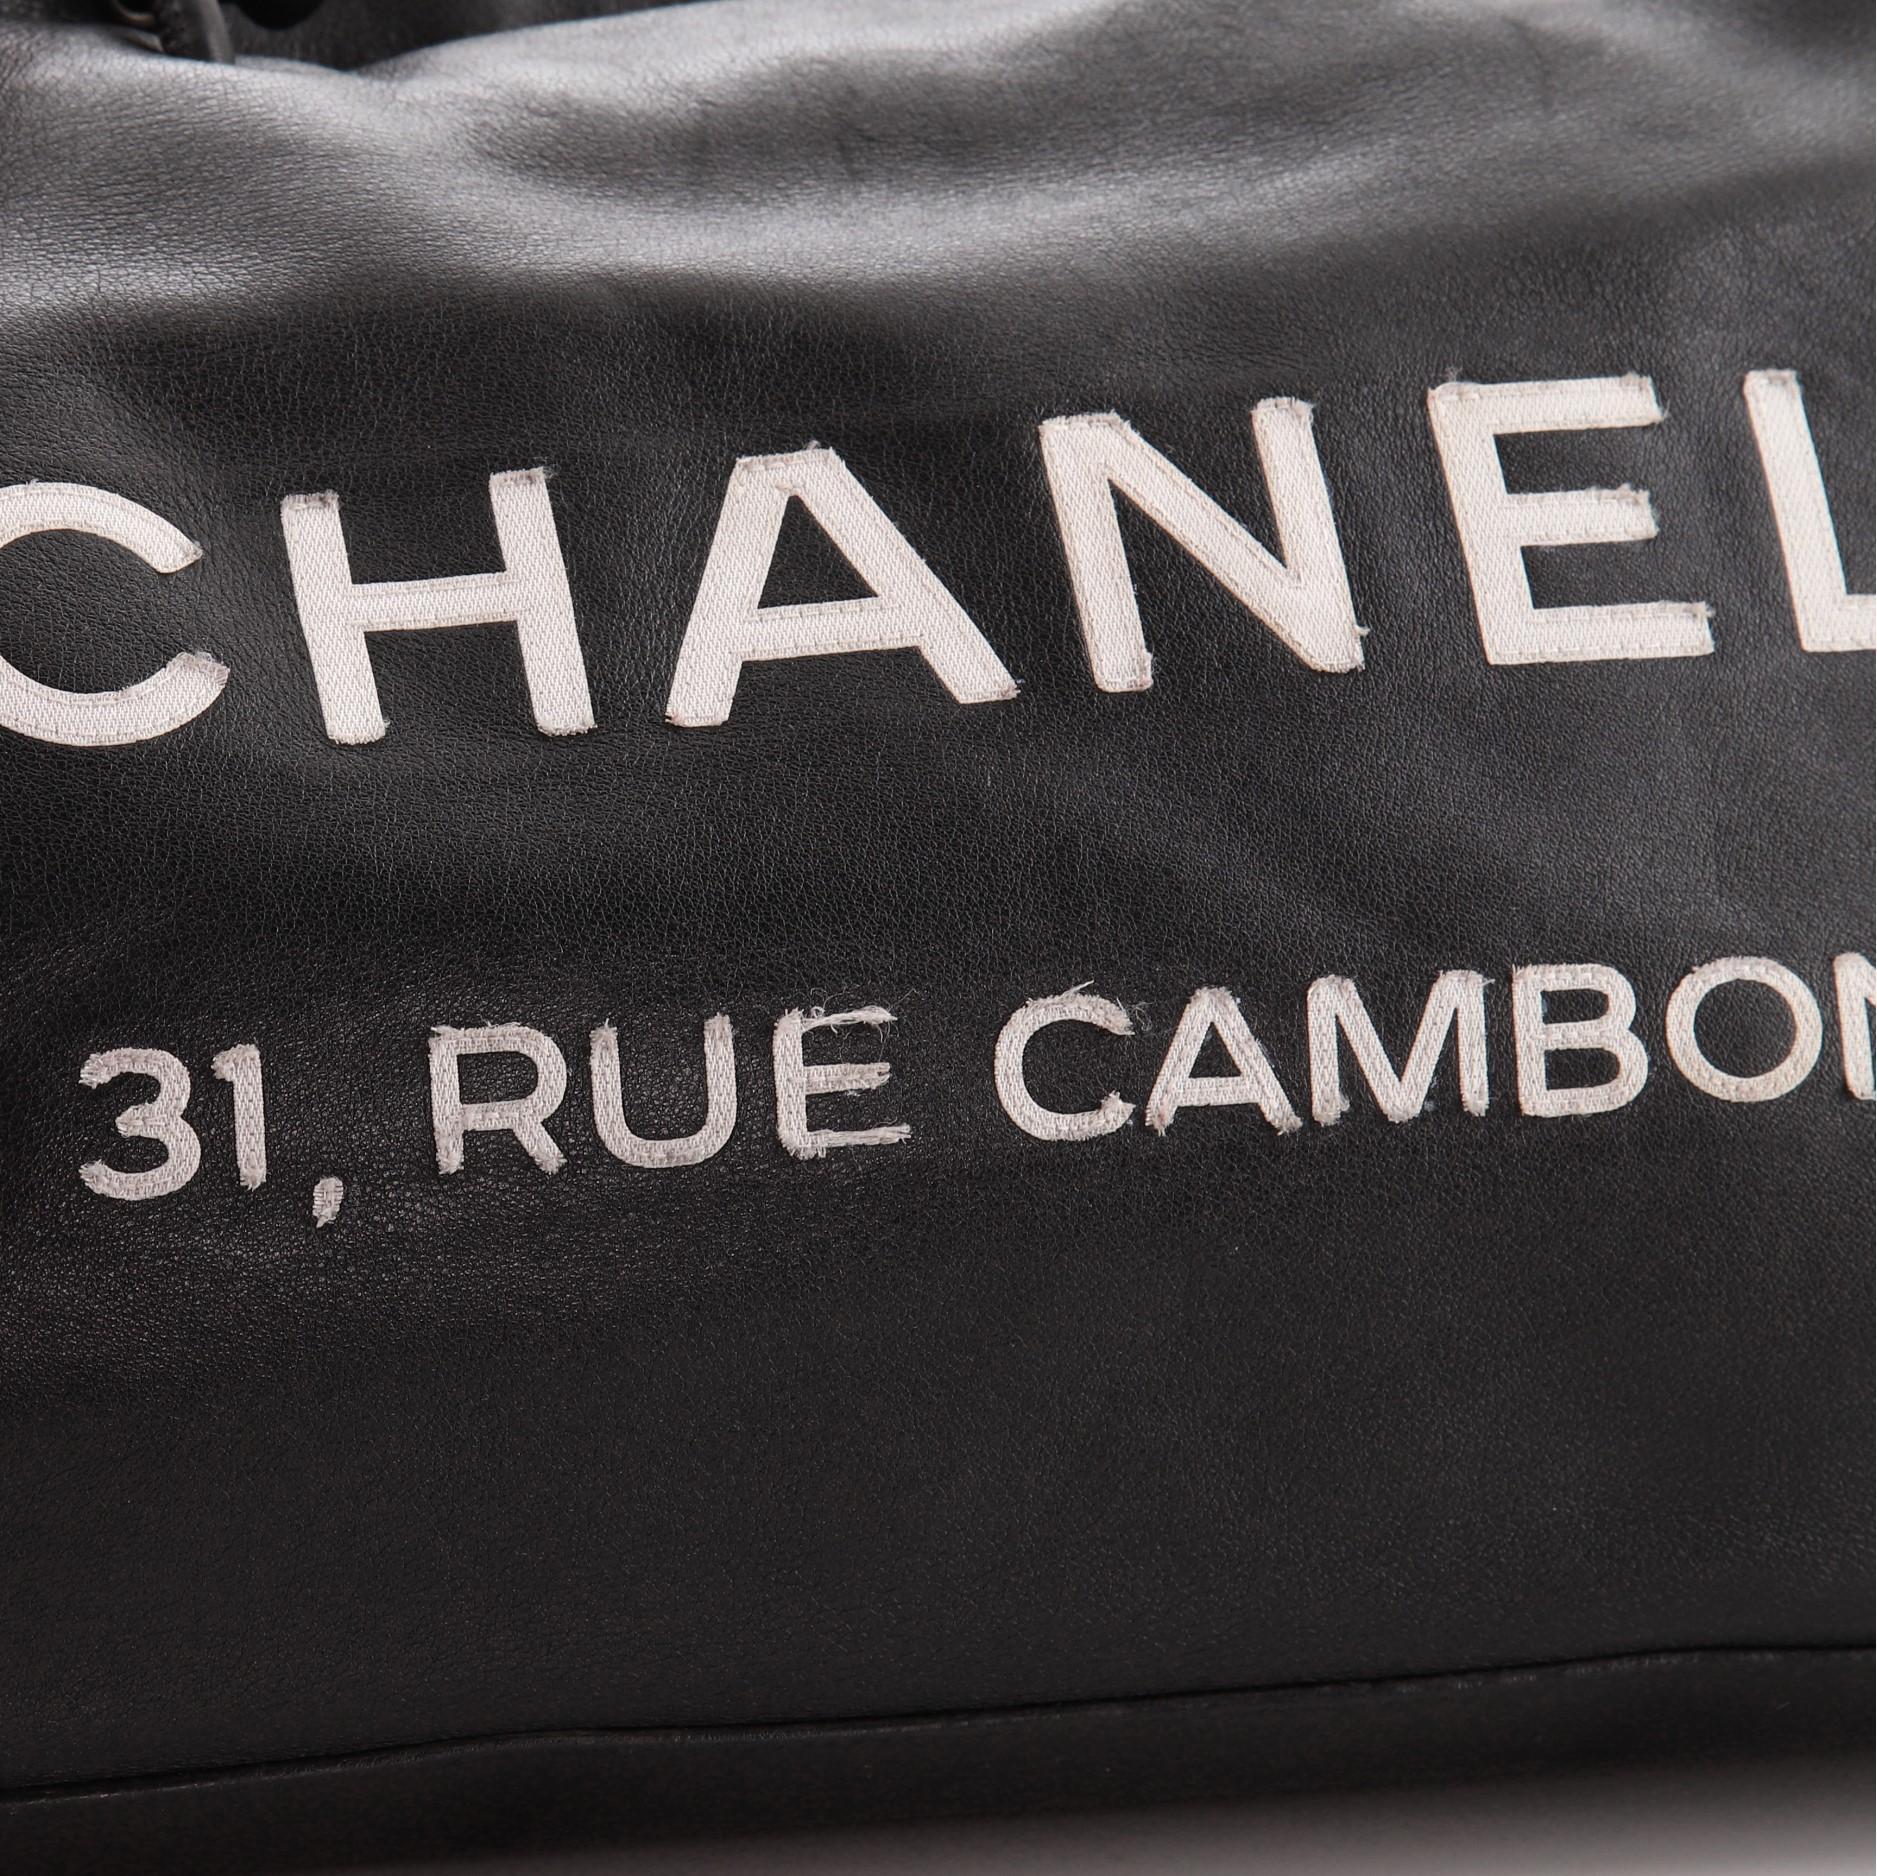 Women's Chanel Essential 31 Rue Cambon Shopping Tote Leather Medium